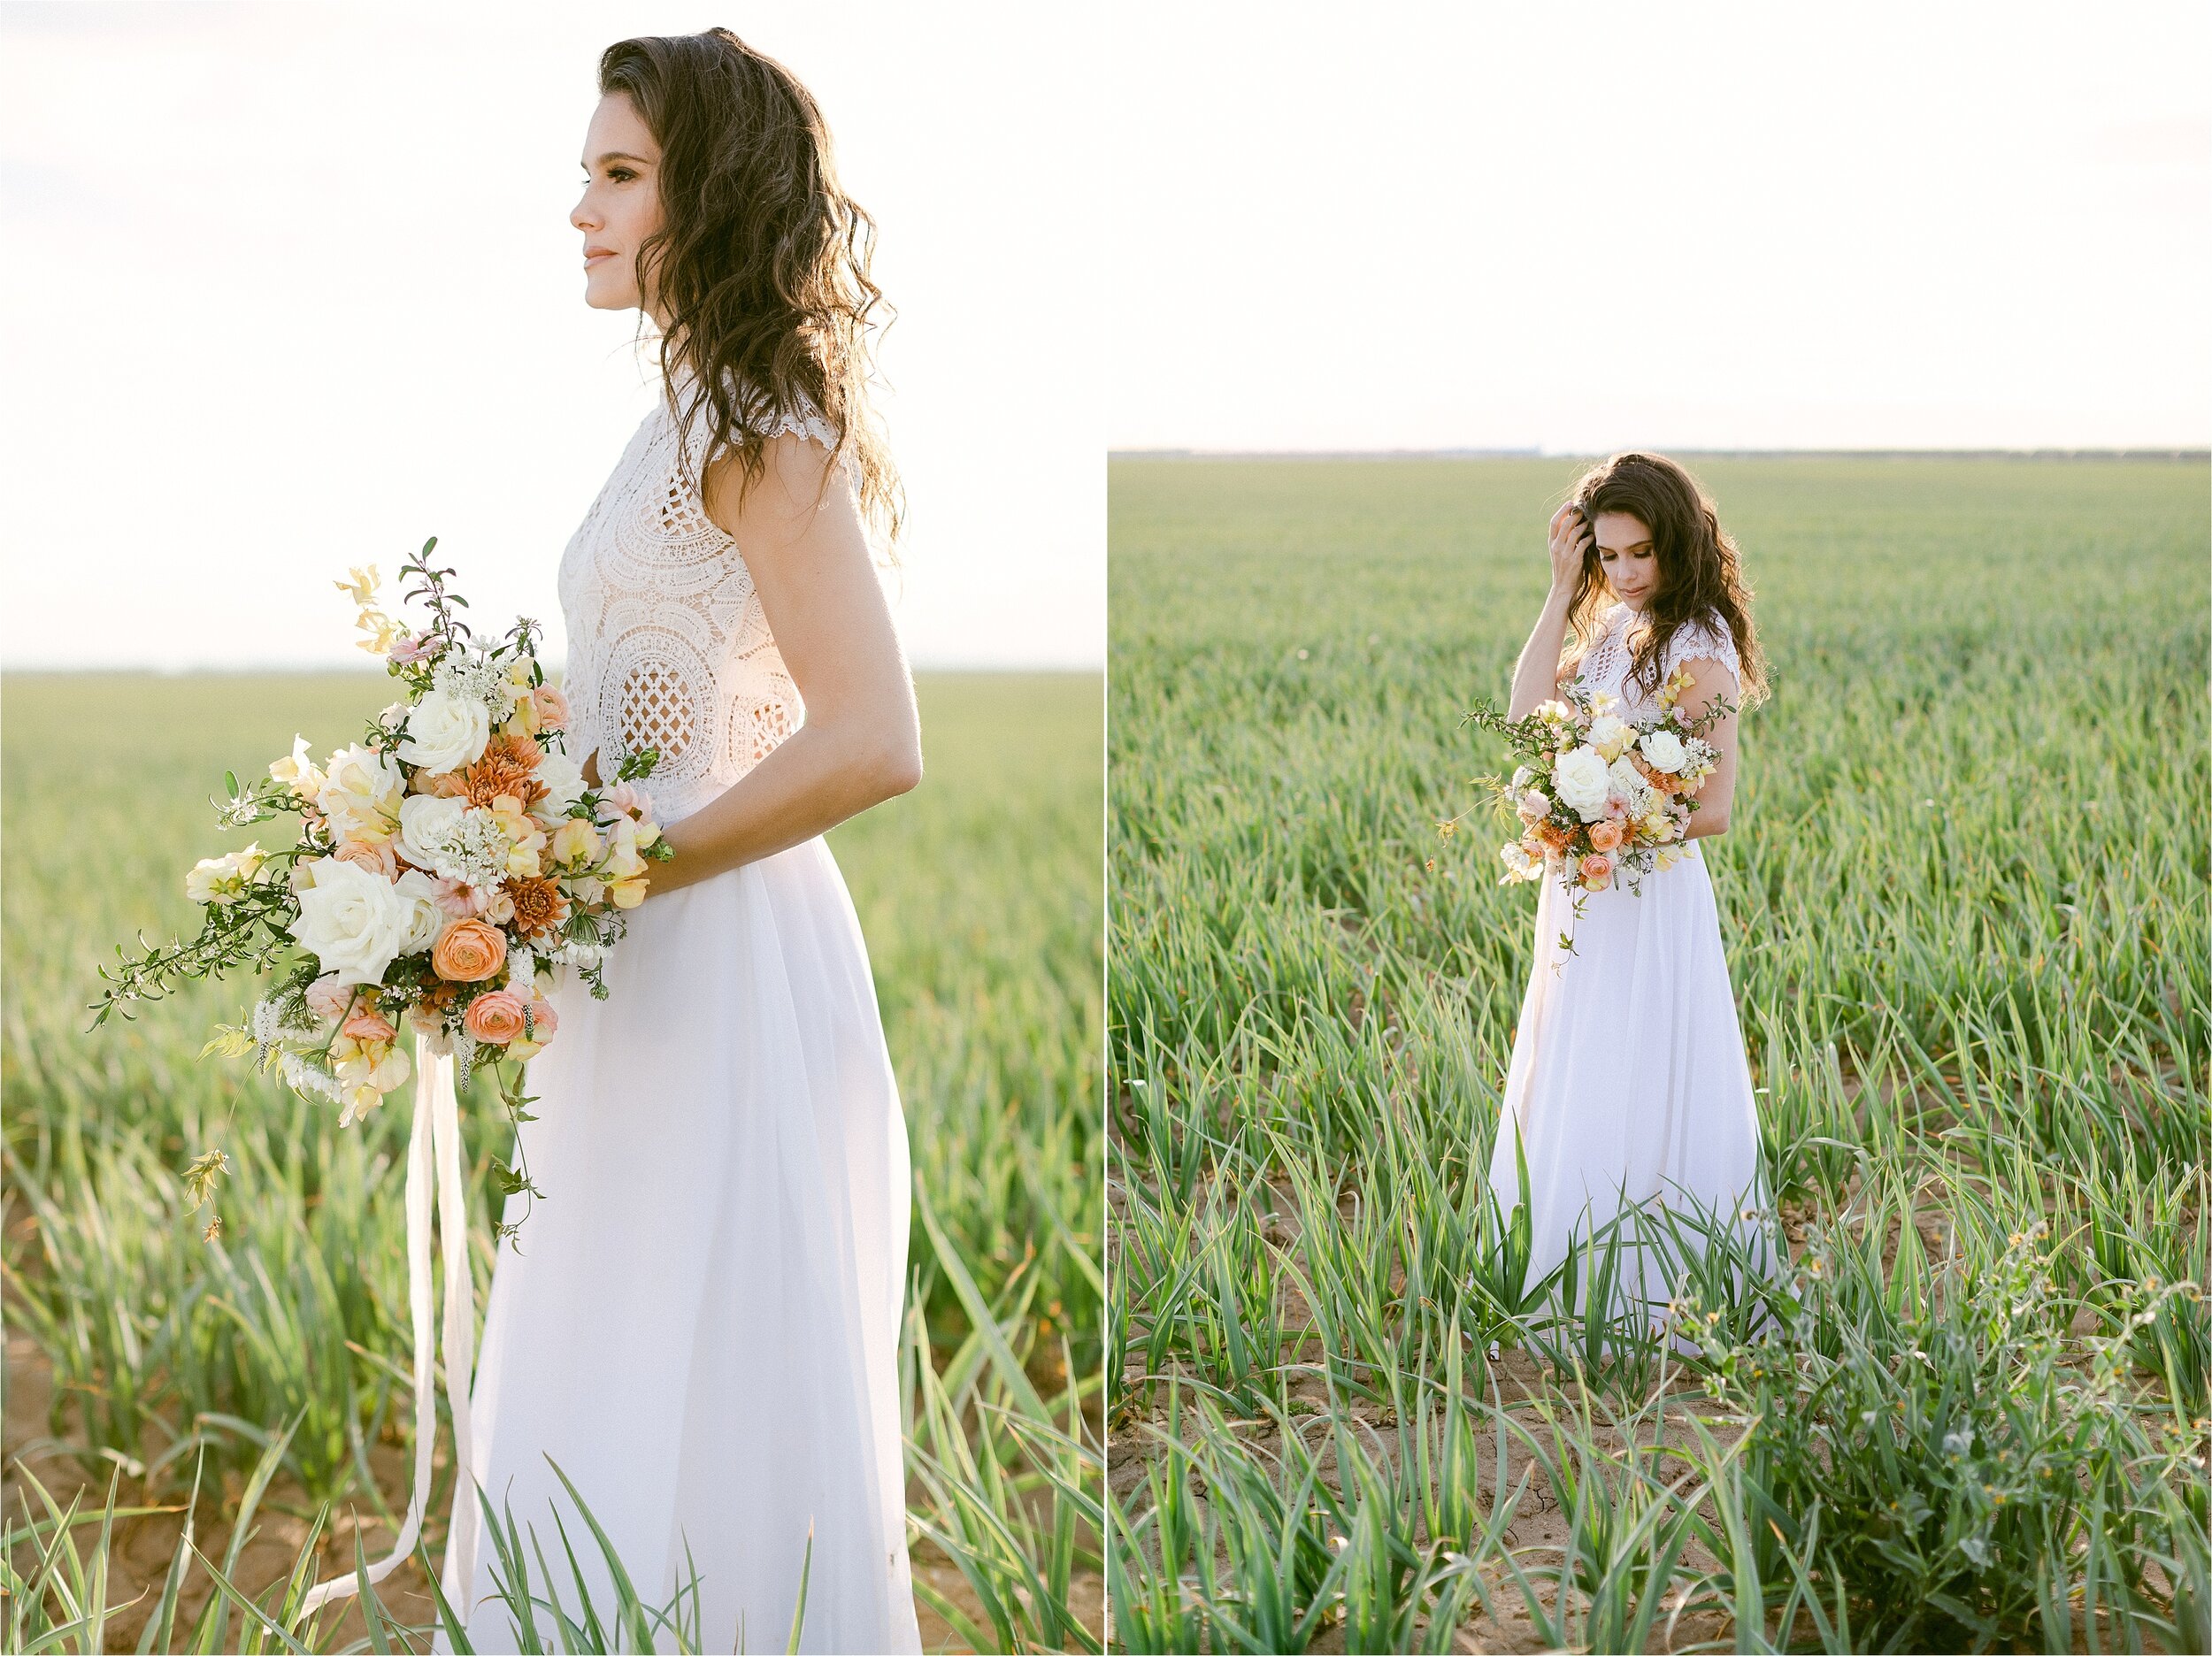 Bridal portrait in field wearing separates featuring a white crocheted lace top and white chiffon skirt.